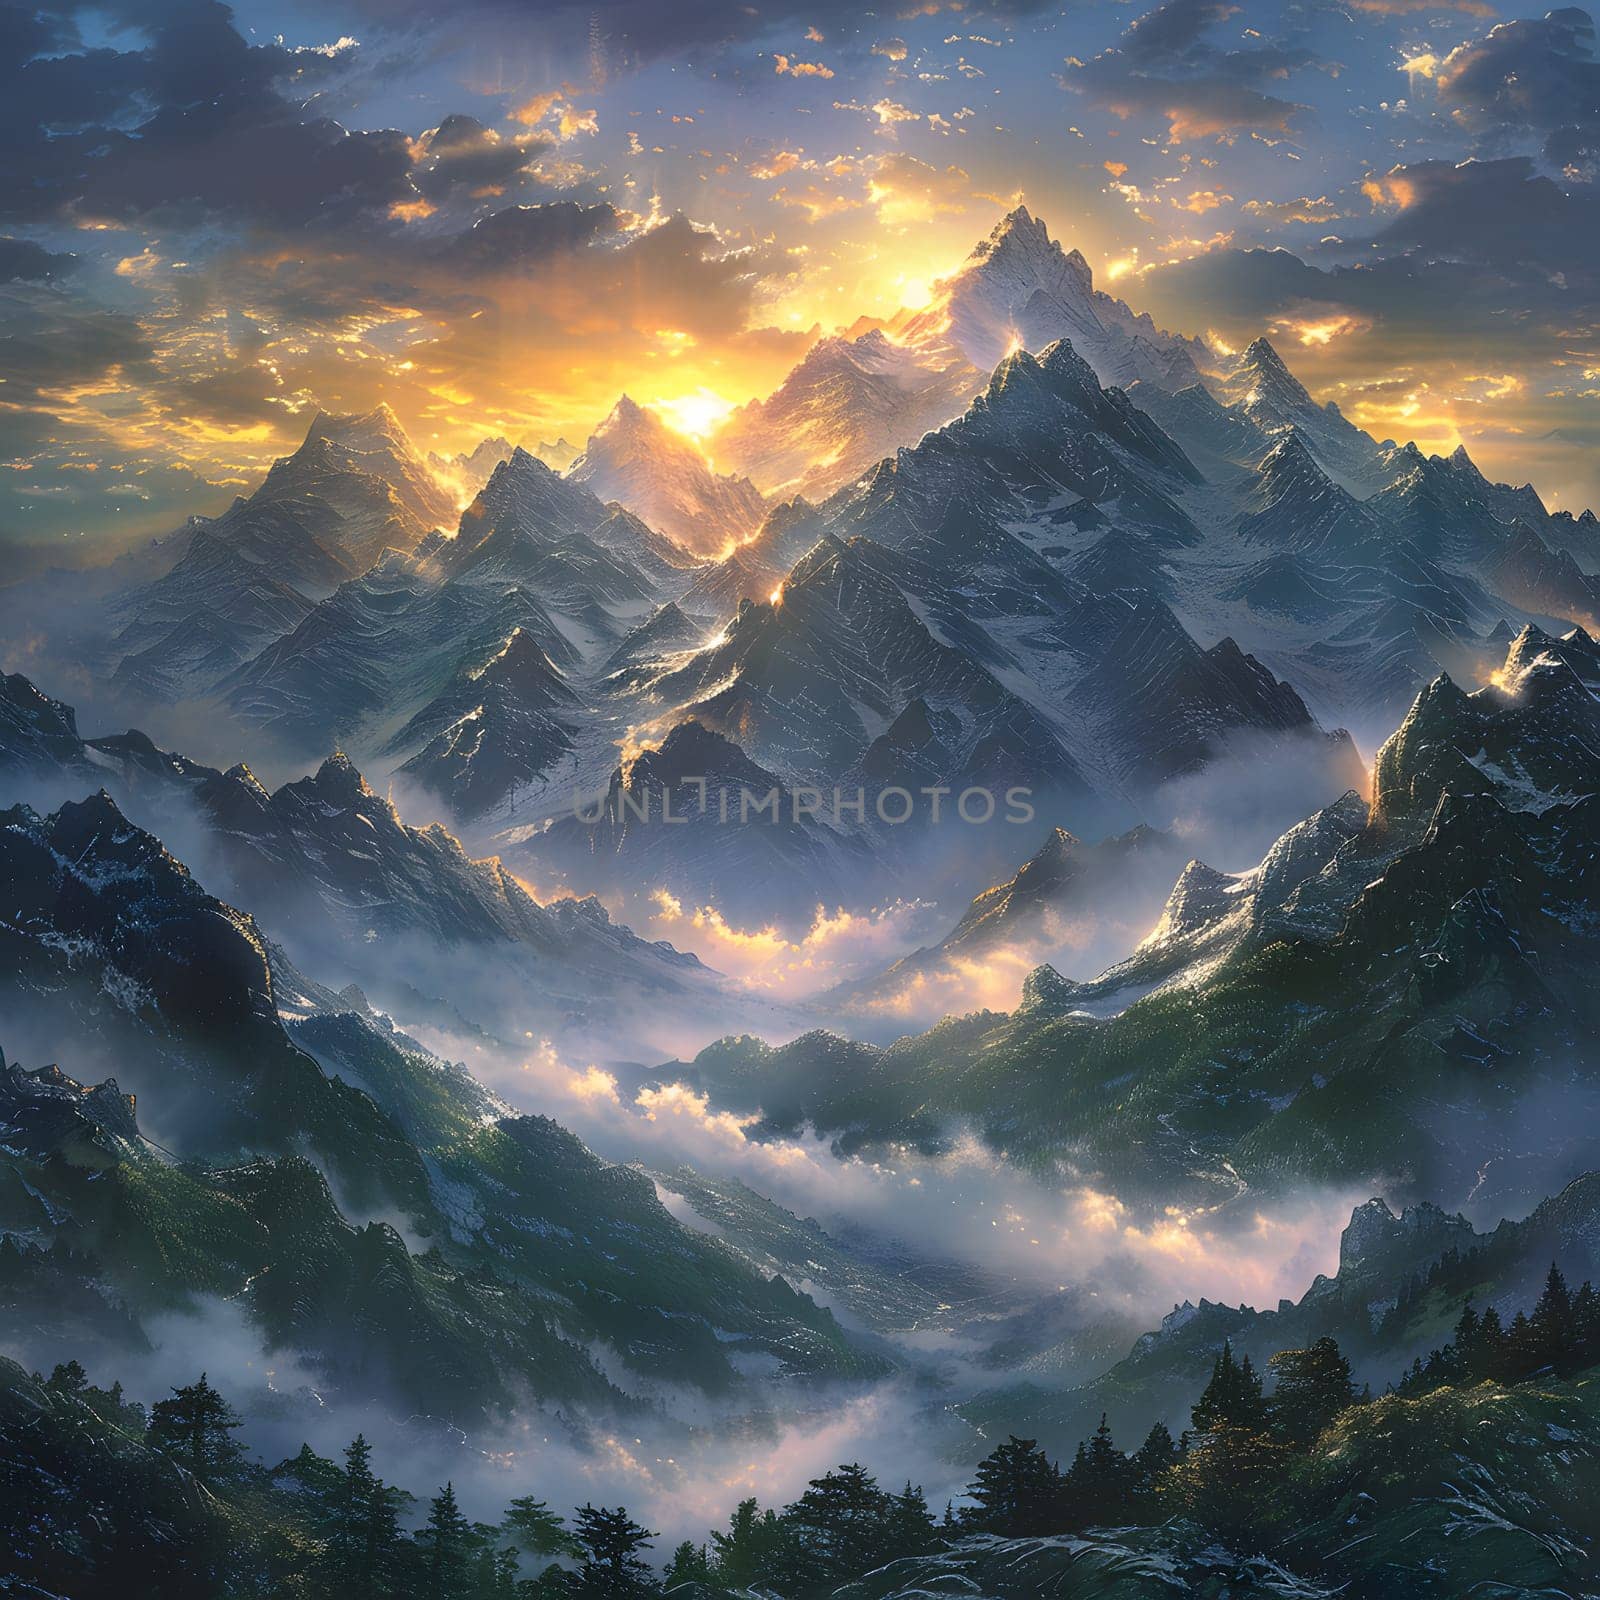 A stunning natural landscape painting of a highland mountain range with sunlight filtering through the cumulus clouds in the sky